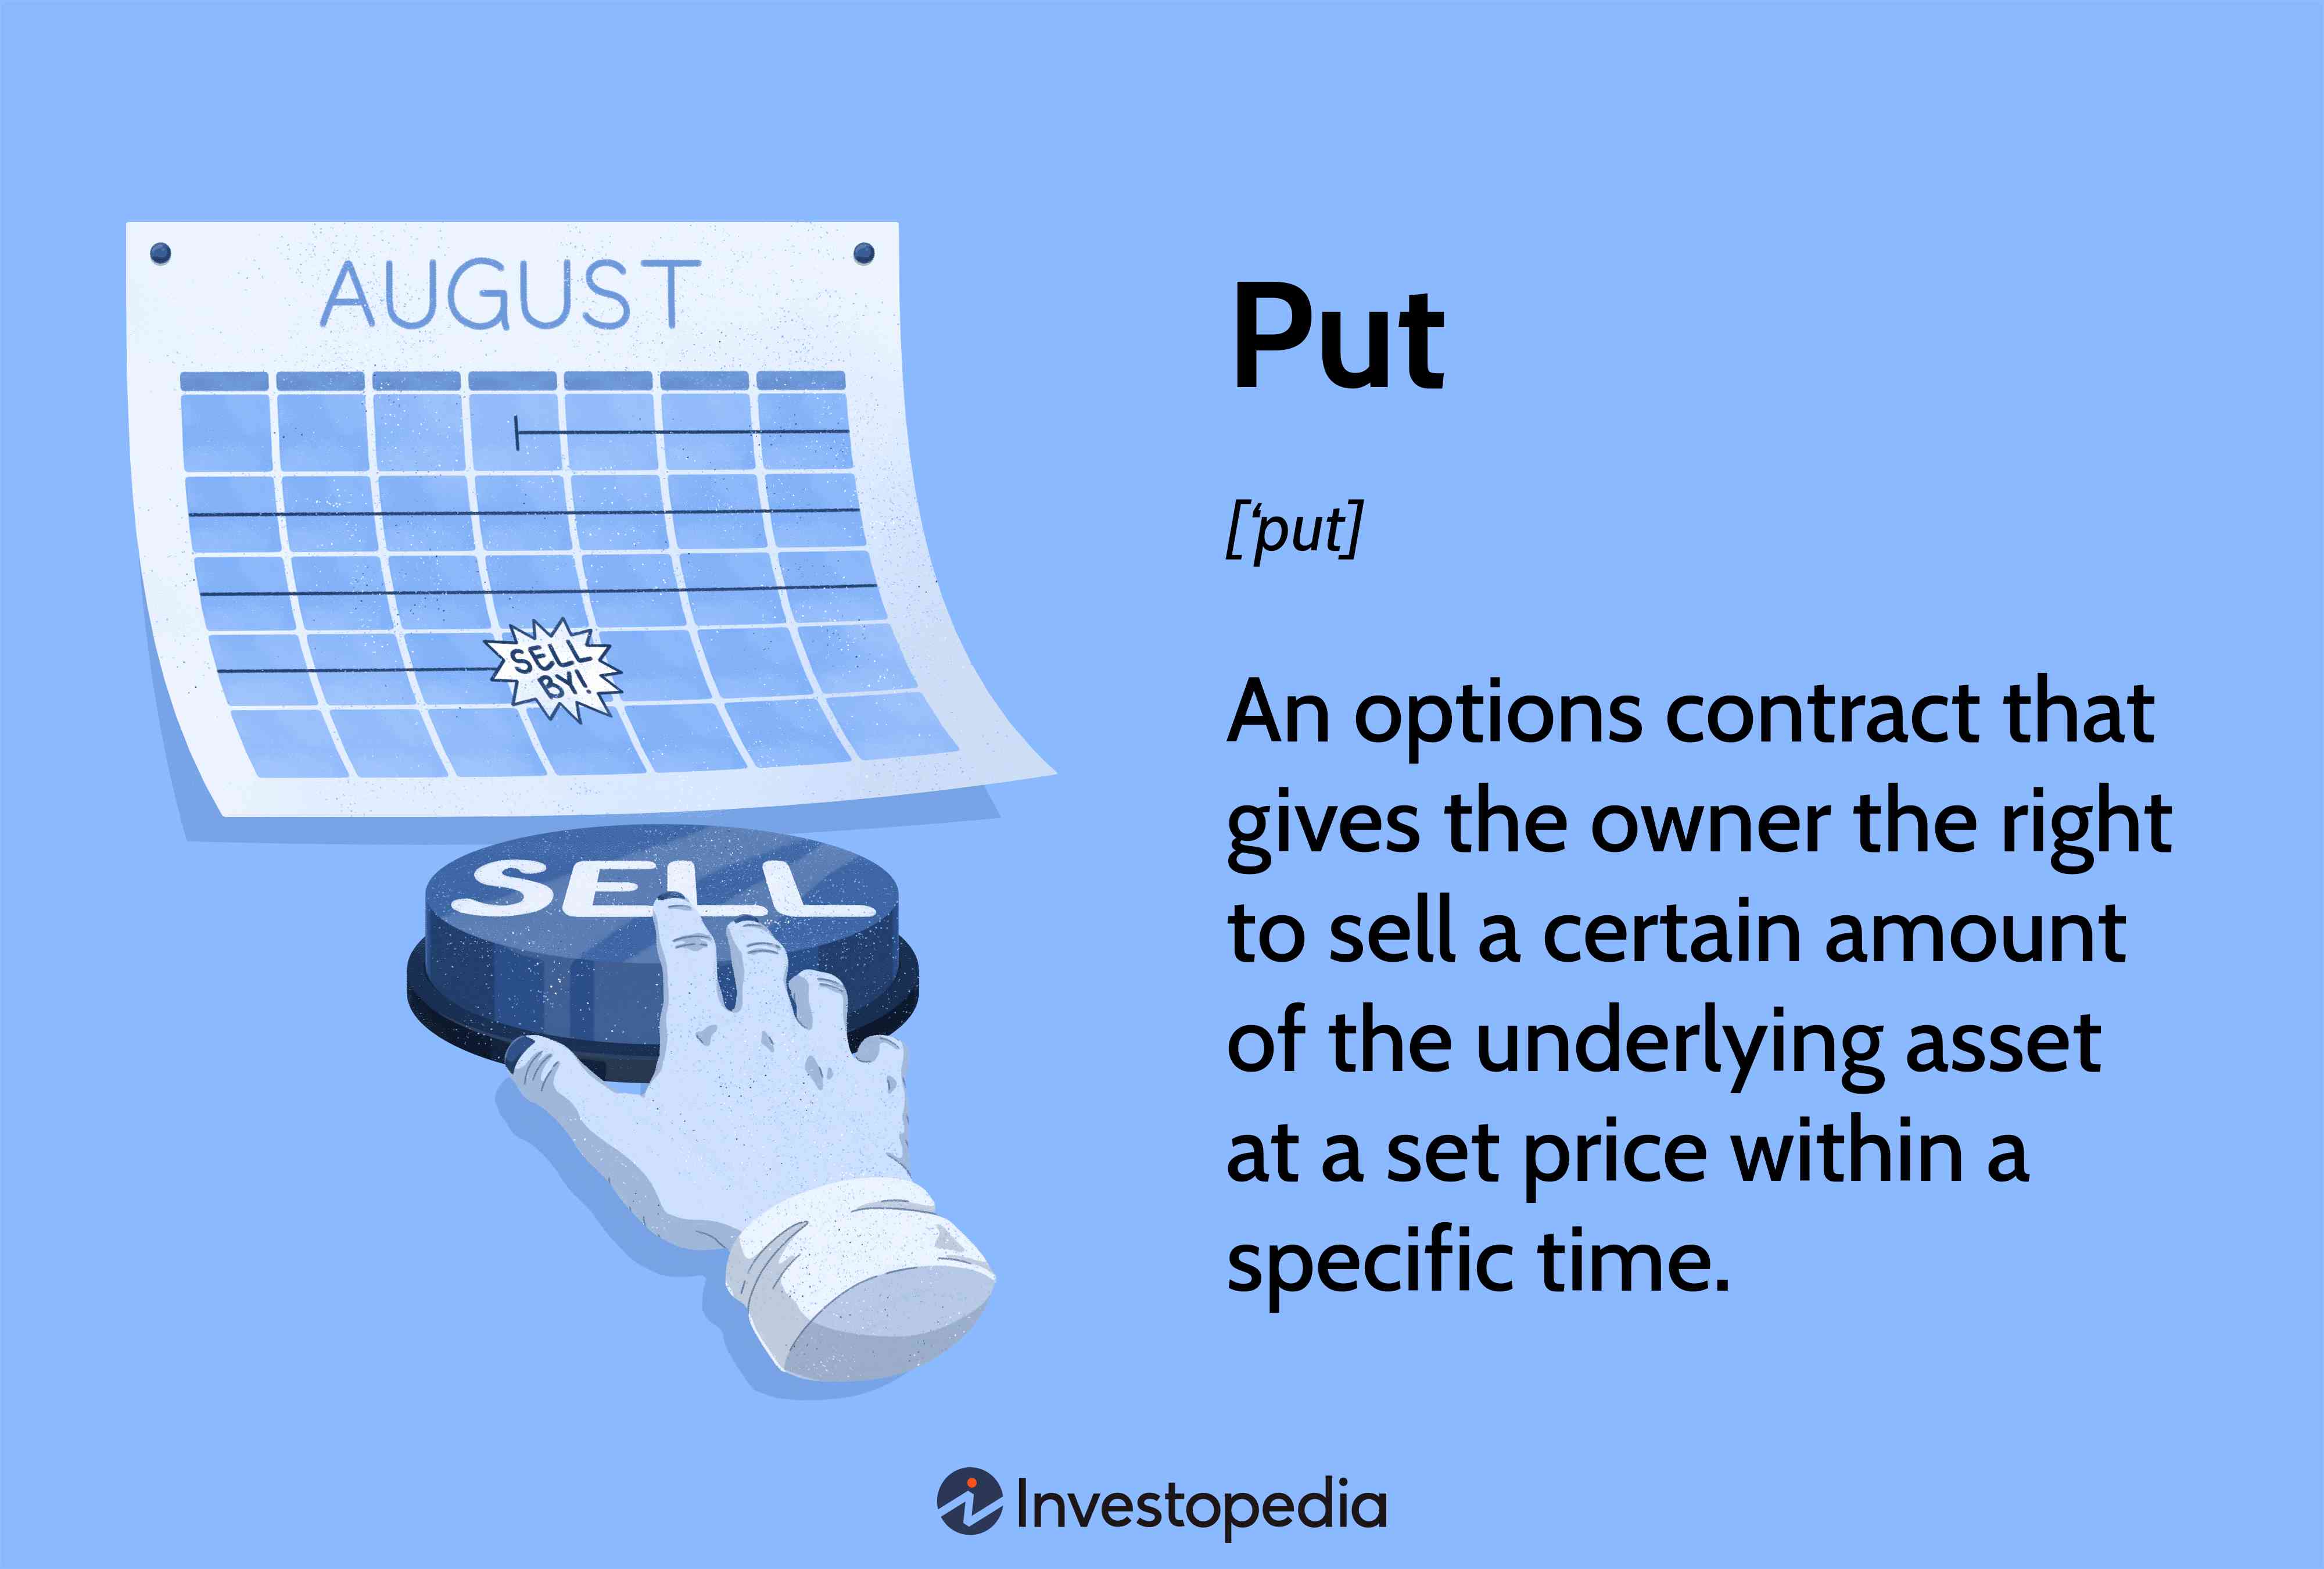 Put: An options contract that gives the owner the right to sell a certain amount of the underlying asset at a set price within a specific time.